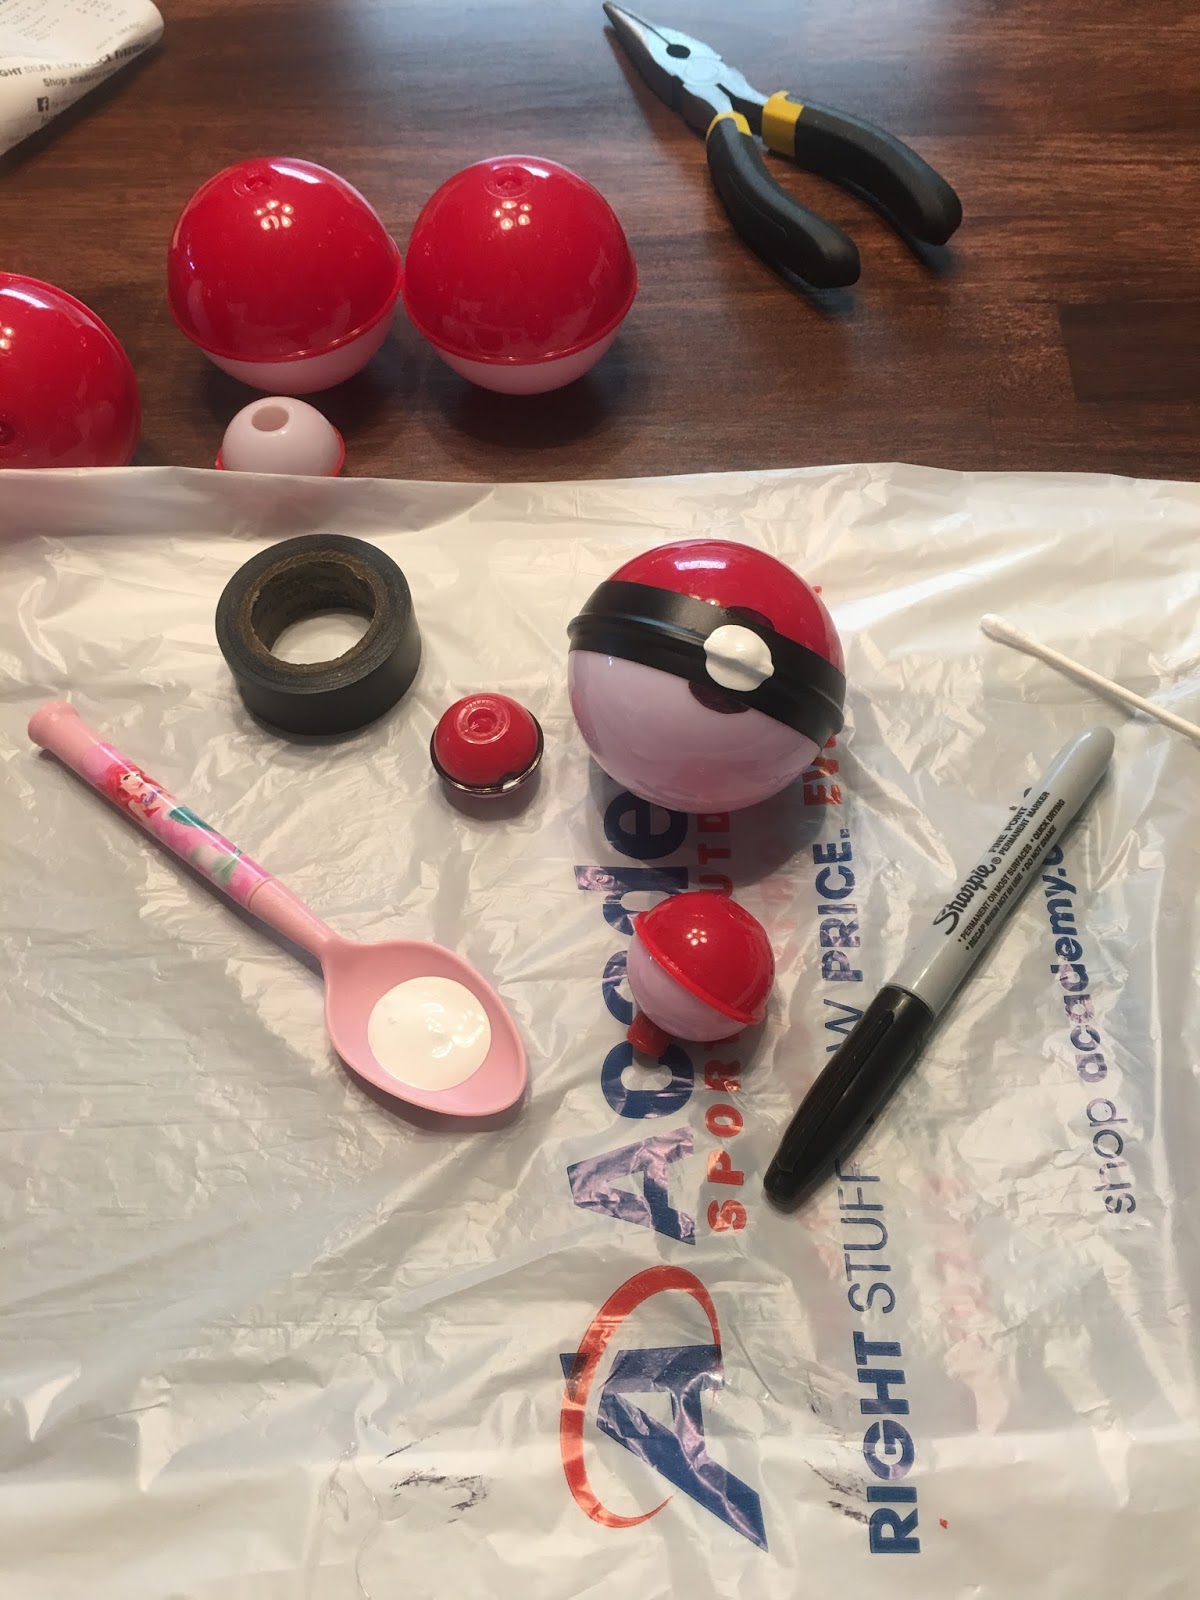 The Eighth Daughter: DIY Pokemon Ball favors and Pokémon decorations